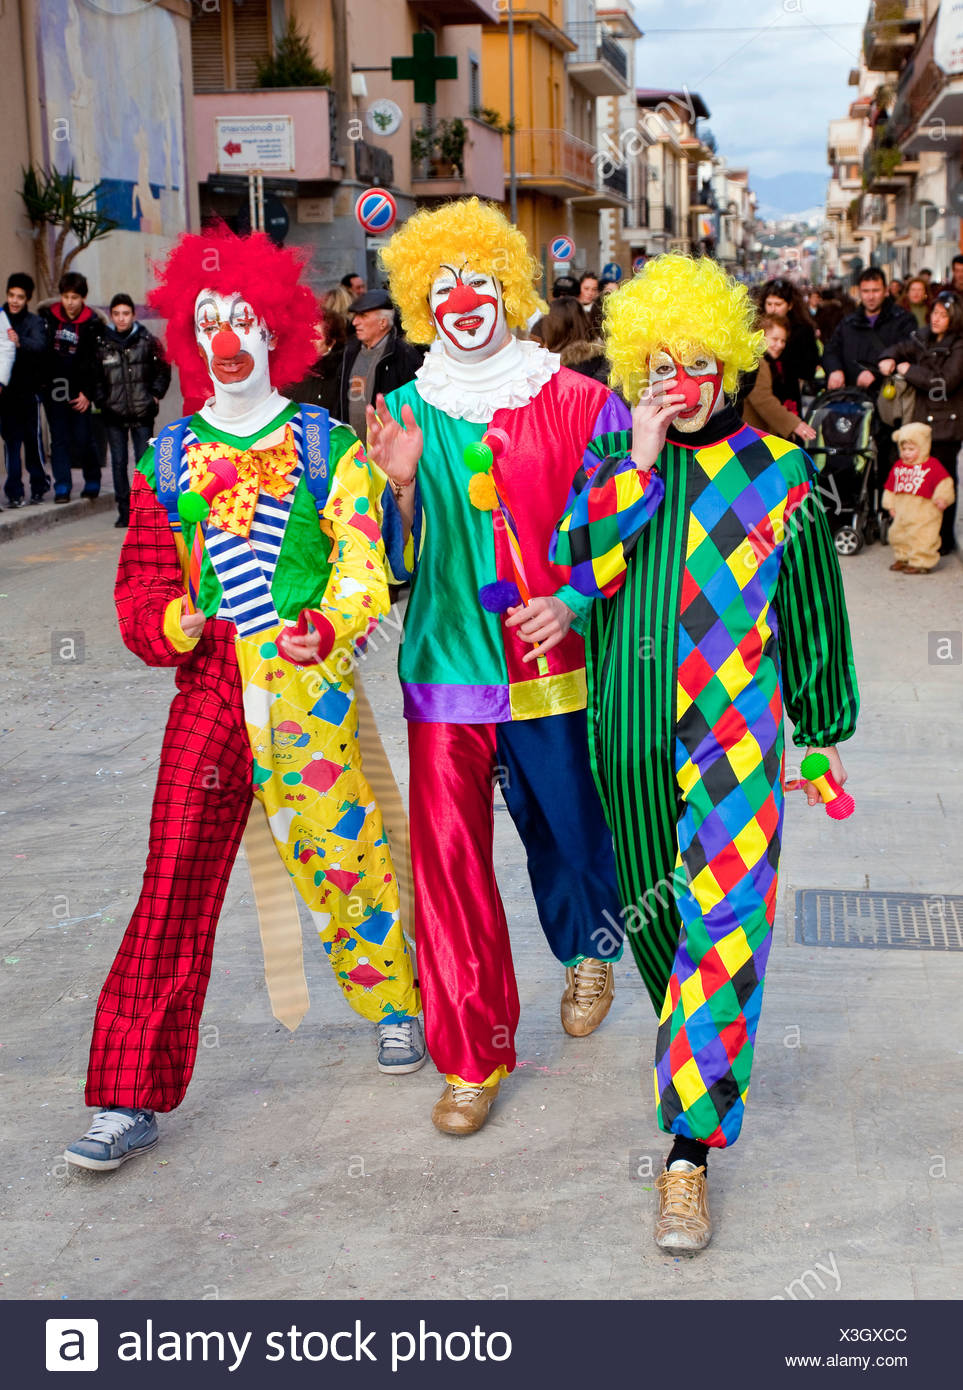 three-men-dressed-up-as-clowns-carnival-